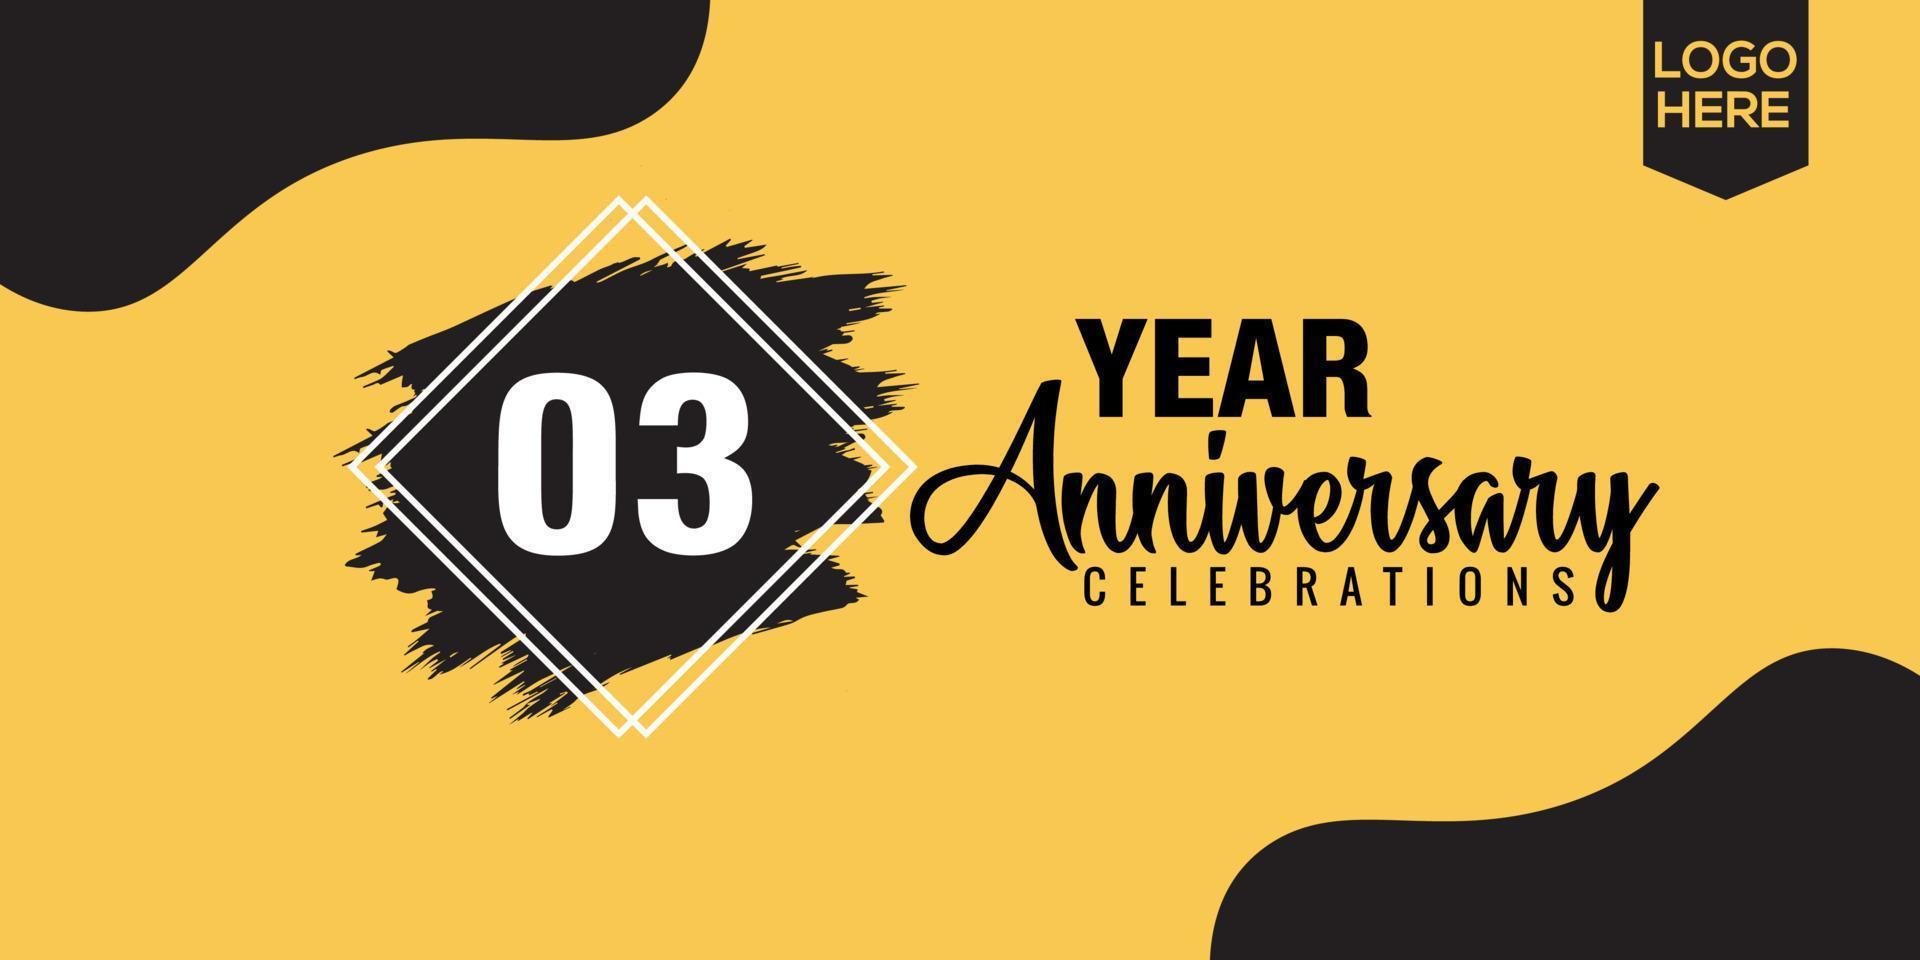 03rd years anniversary celebration logo design with black brush and yellow color with black abstract vector illustration